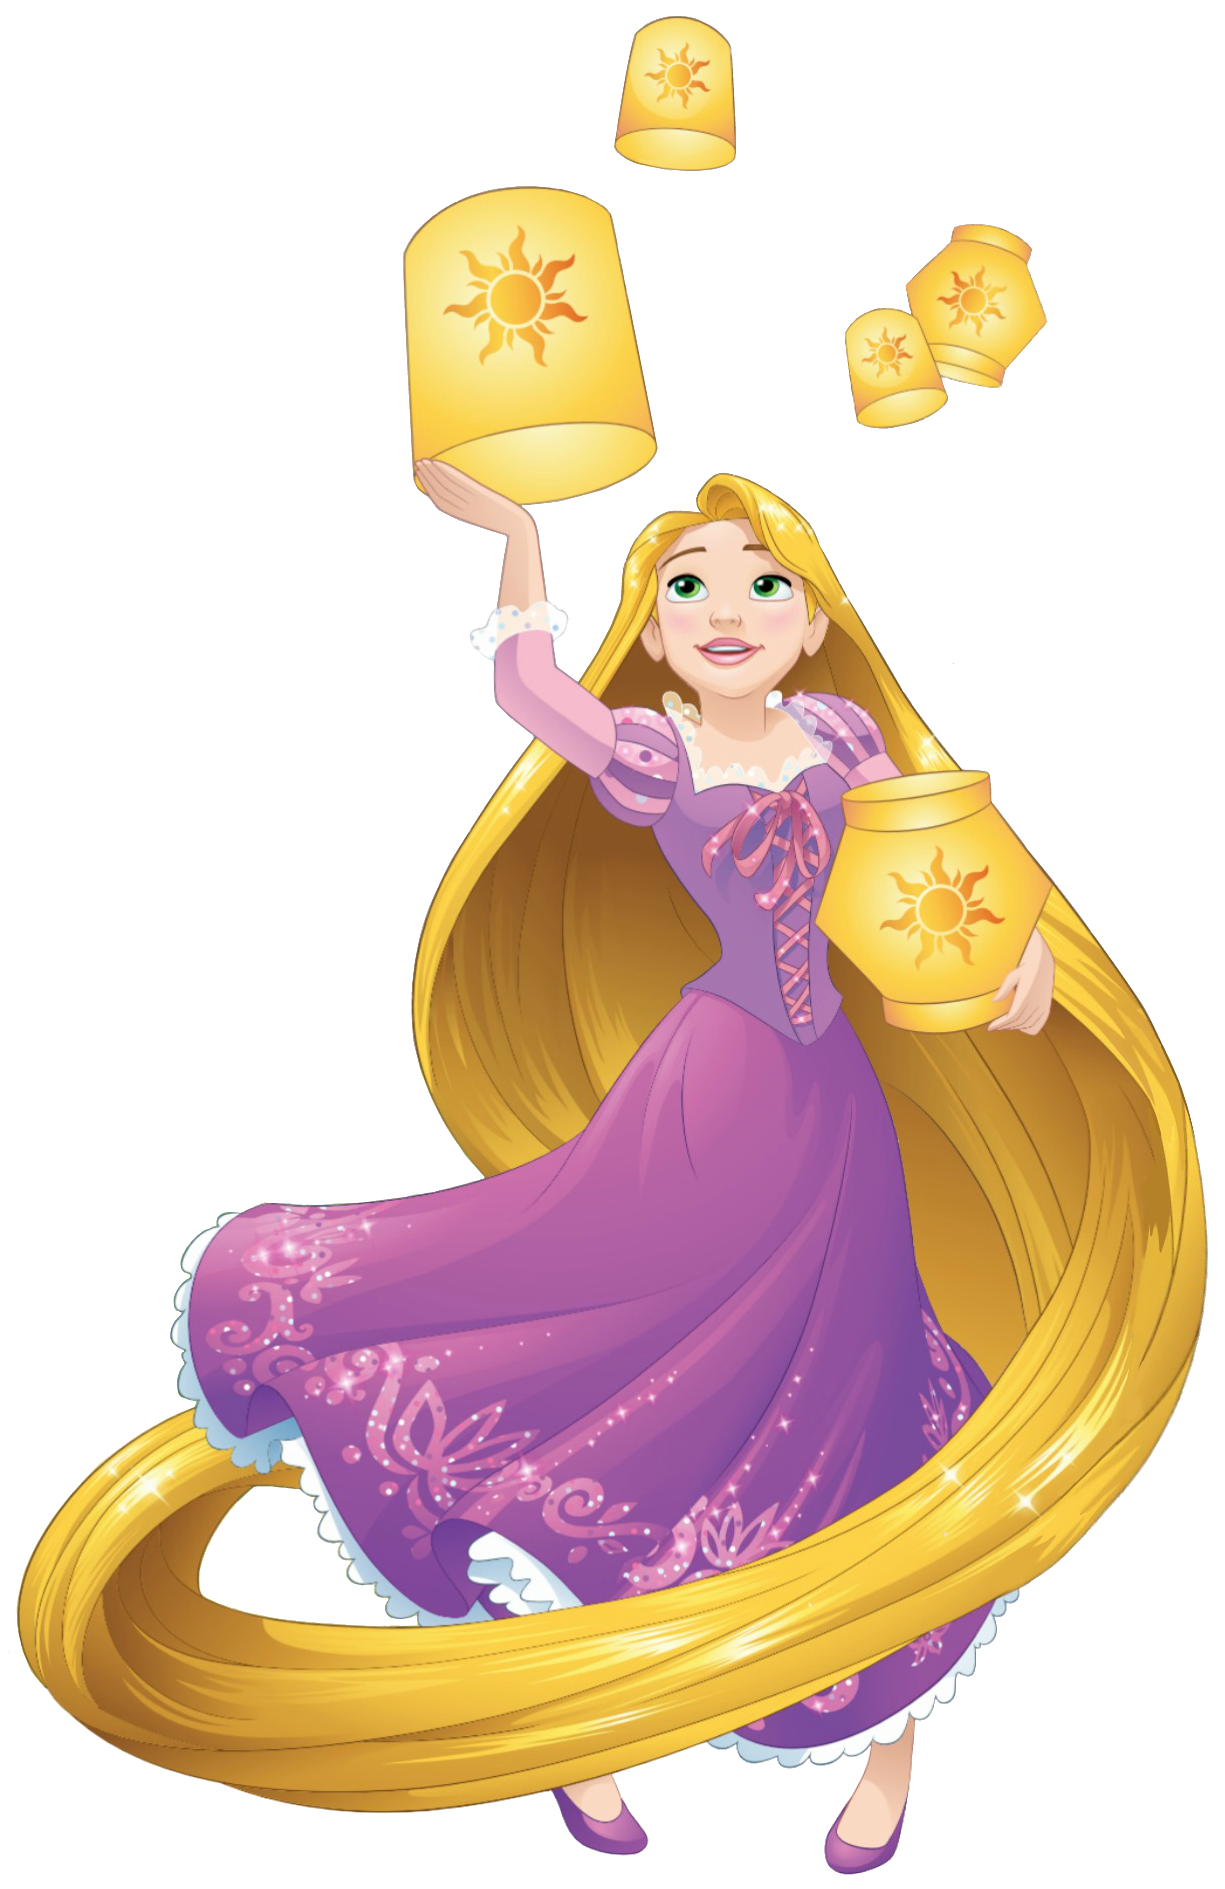 Clipart crown rapunzel. Gallery pinterest images of